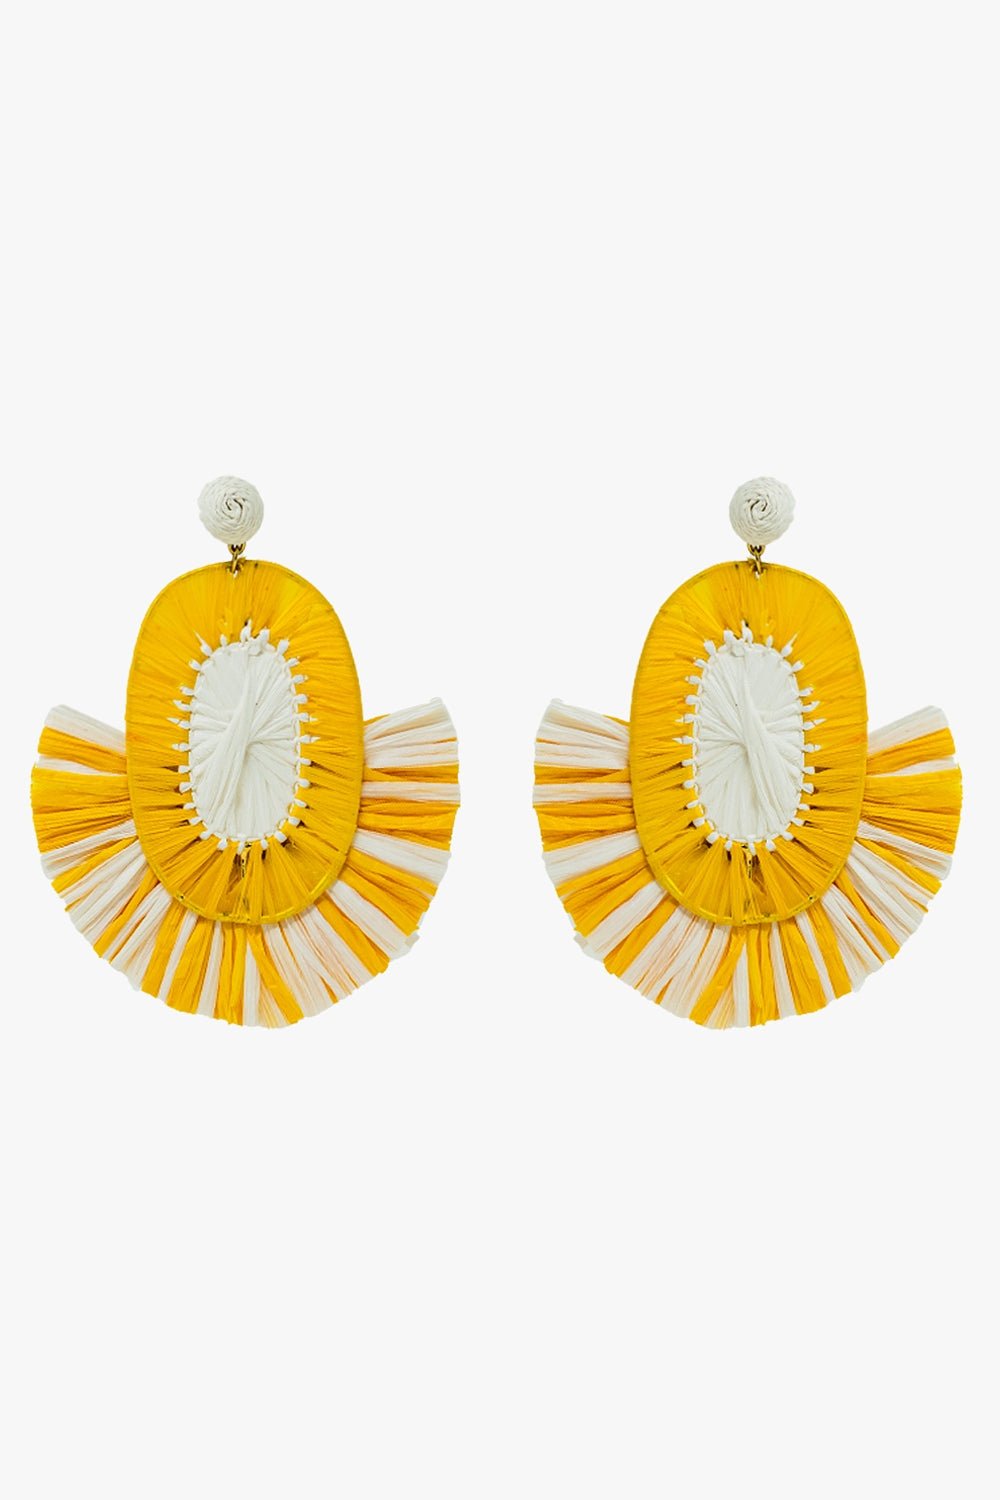 Maxi Dropped Raffia Earrings With Yellow and White Tassels - Mack & Harvie